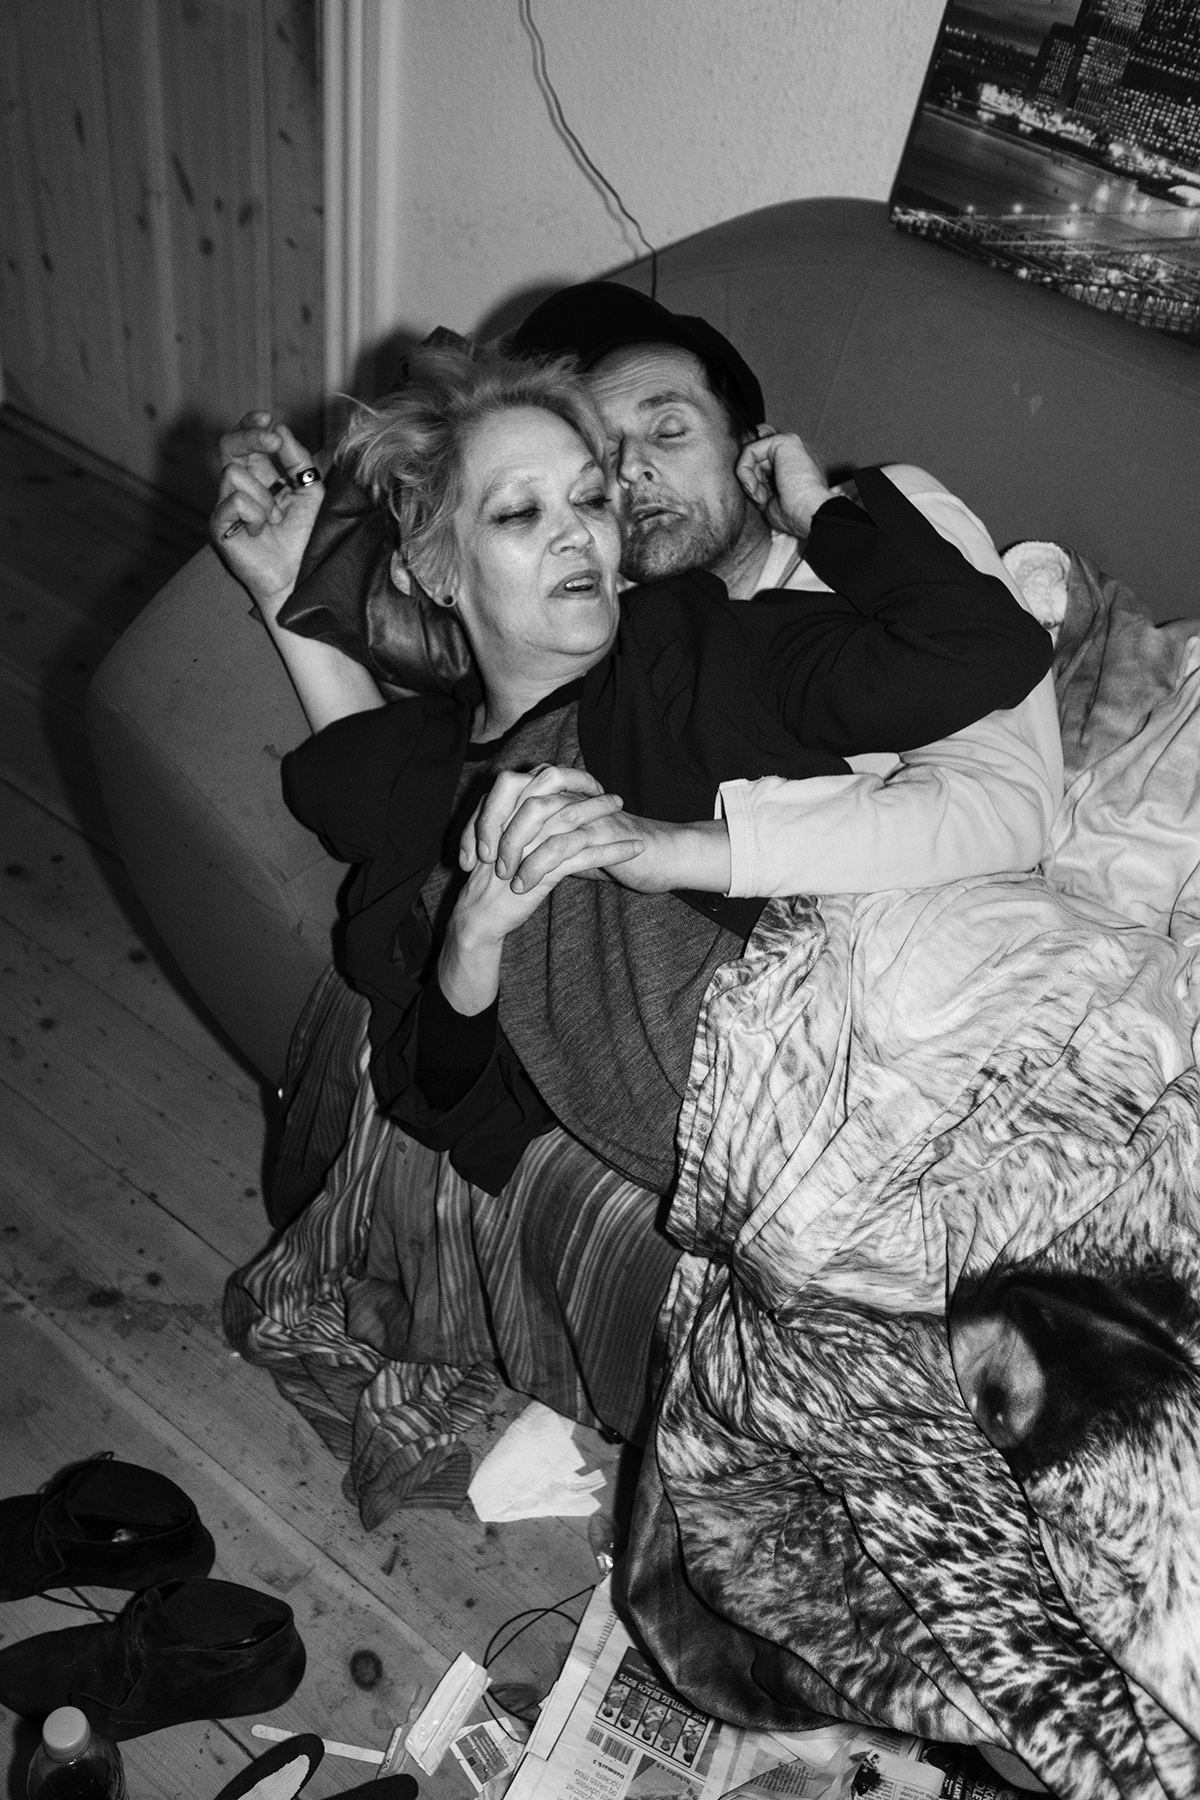 Mikkel Hørlyck, Jørgen, a Mystery – Man and woman lying on a couch. Pedersen is hugging her from behind, the floor is quite messy.